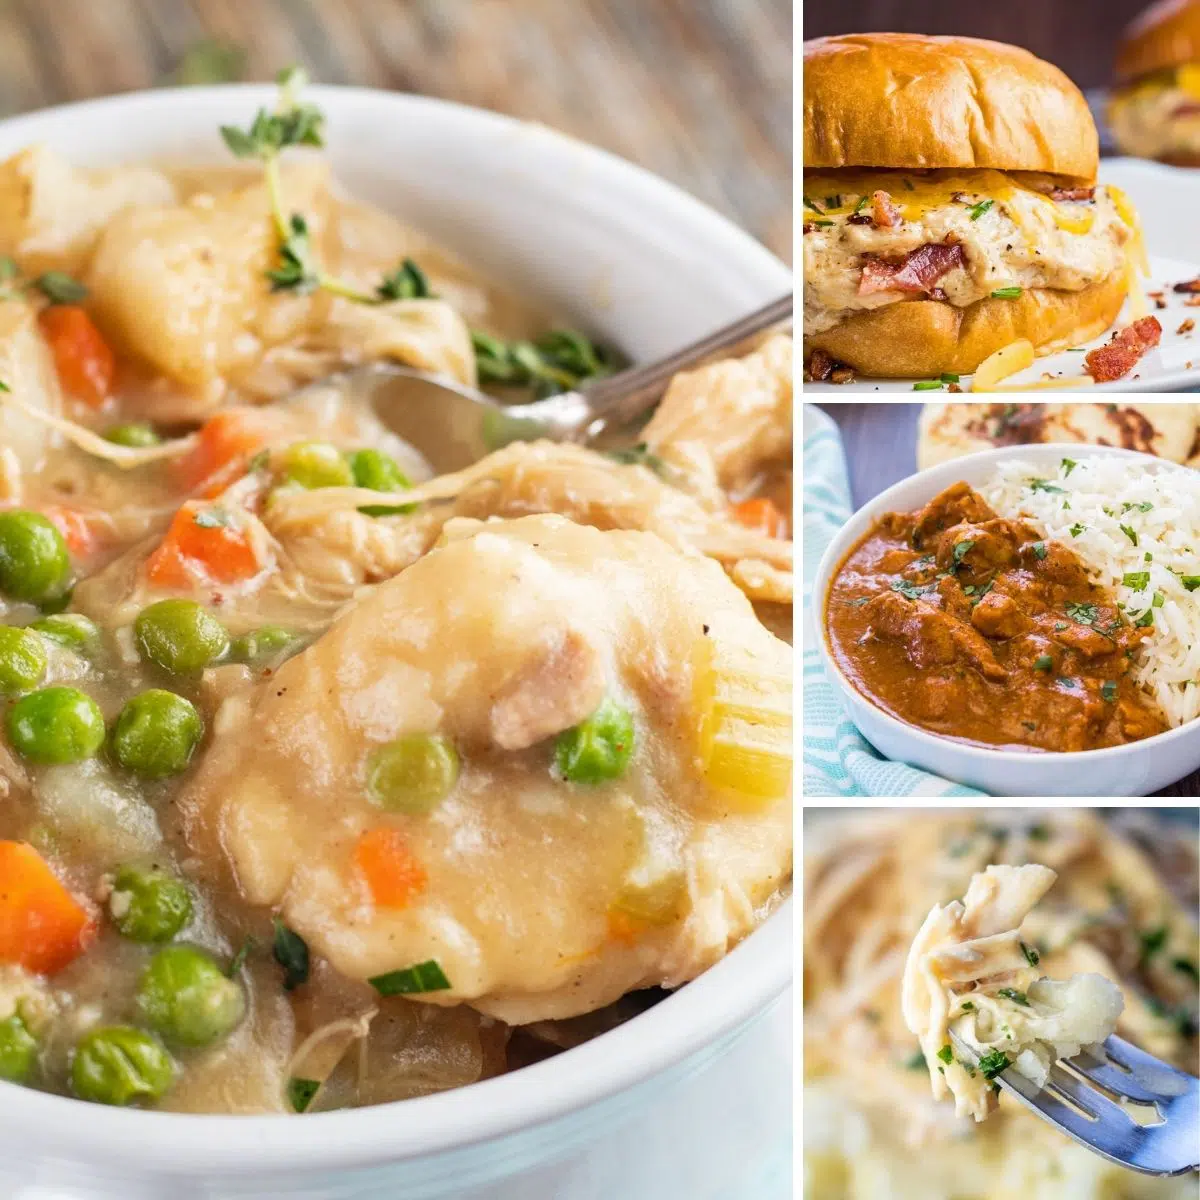 Best crockpot chicken recipes you can make in your slow cooker for tasty meals collage with 4 images.